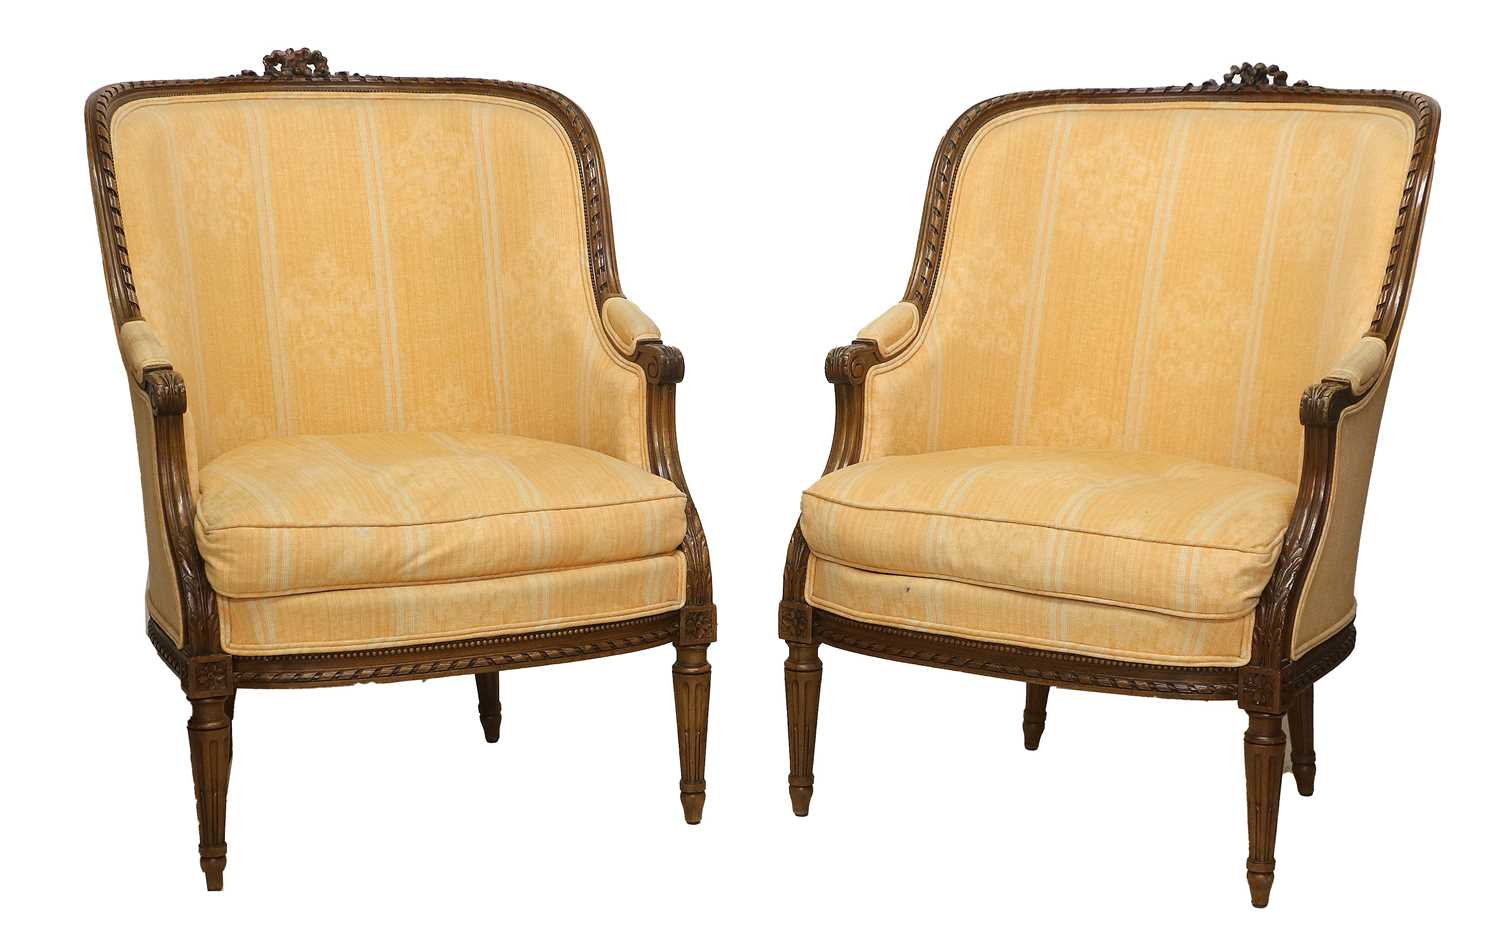 A Pair of Early 20th Century Carved Walnut or Beech Framed Tub Armchairs, recovered in orange floral